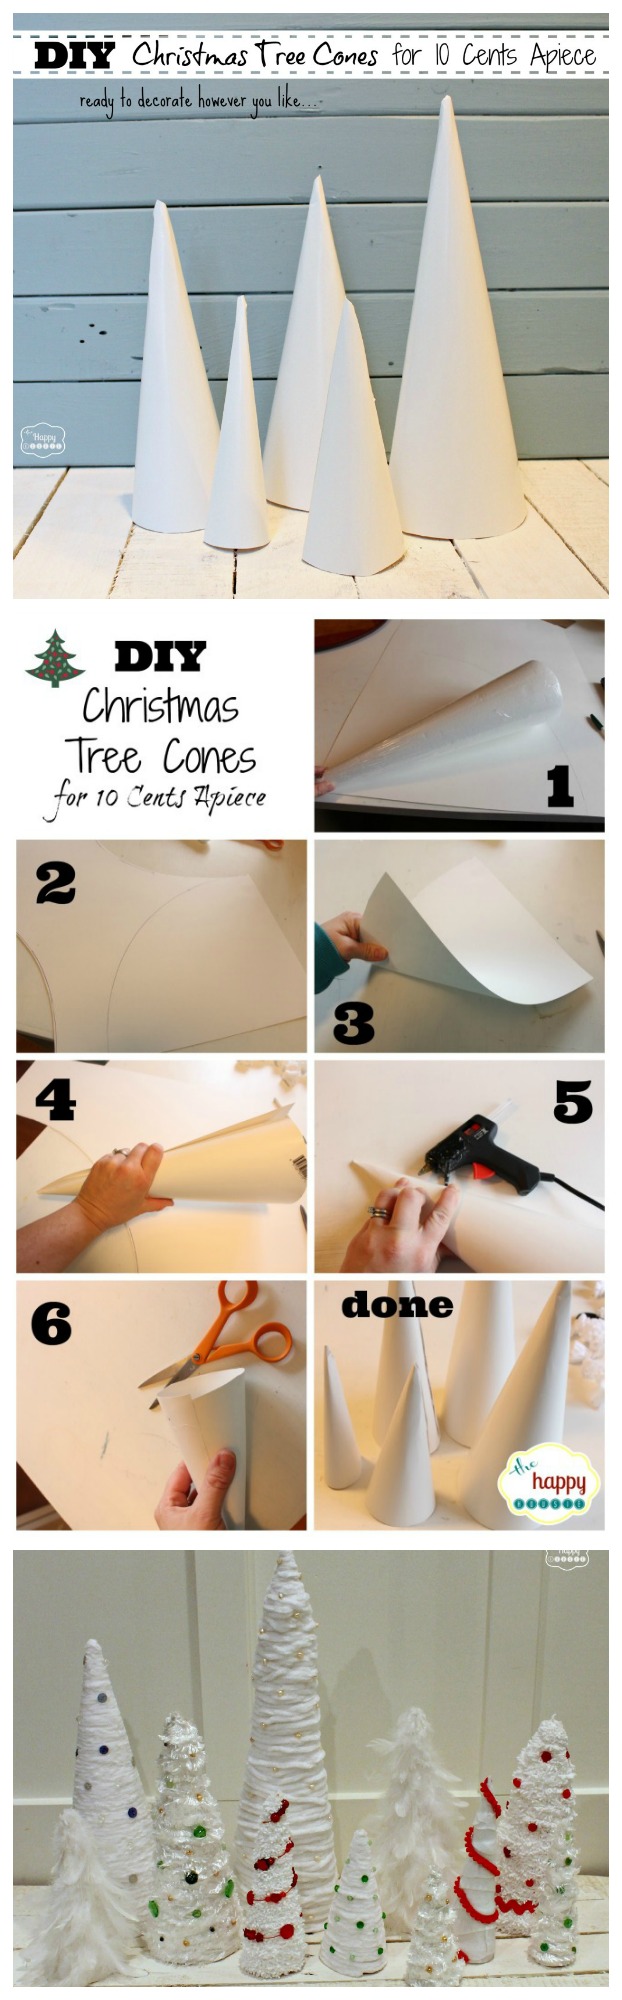 How to Make Christmas Tree Cone Craft Forms for 10 Cents Apiece